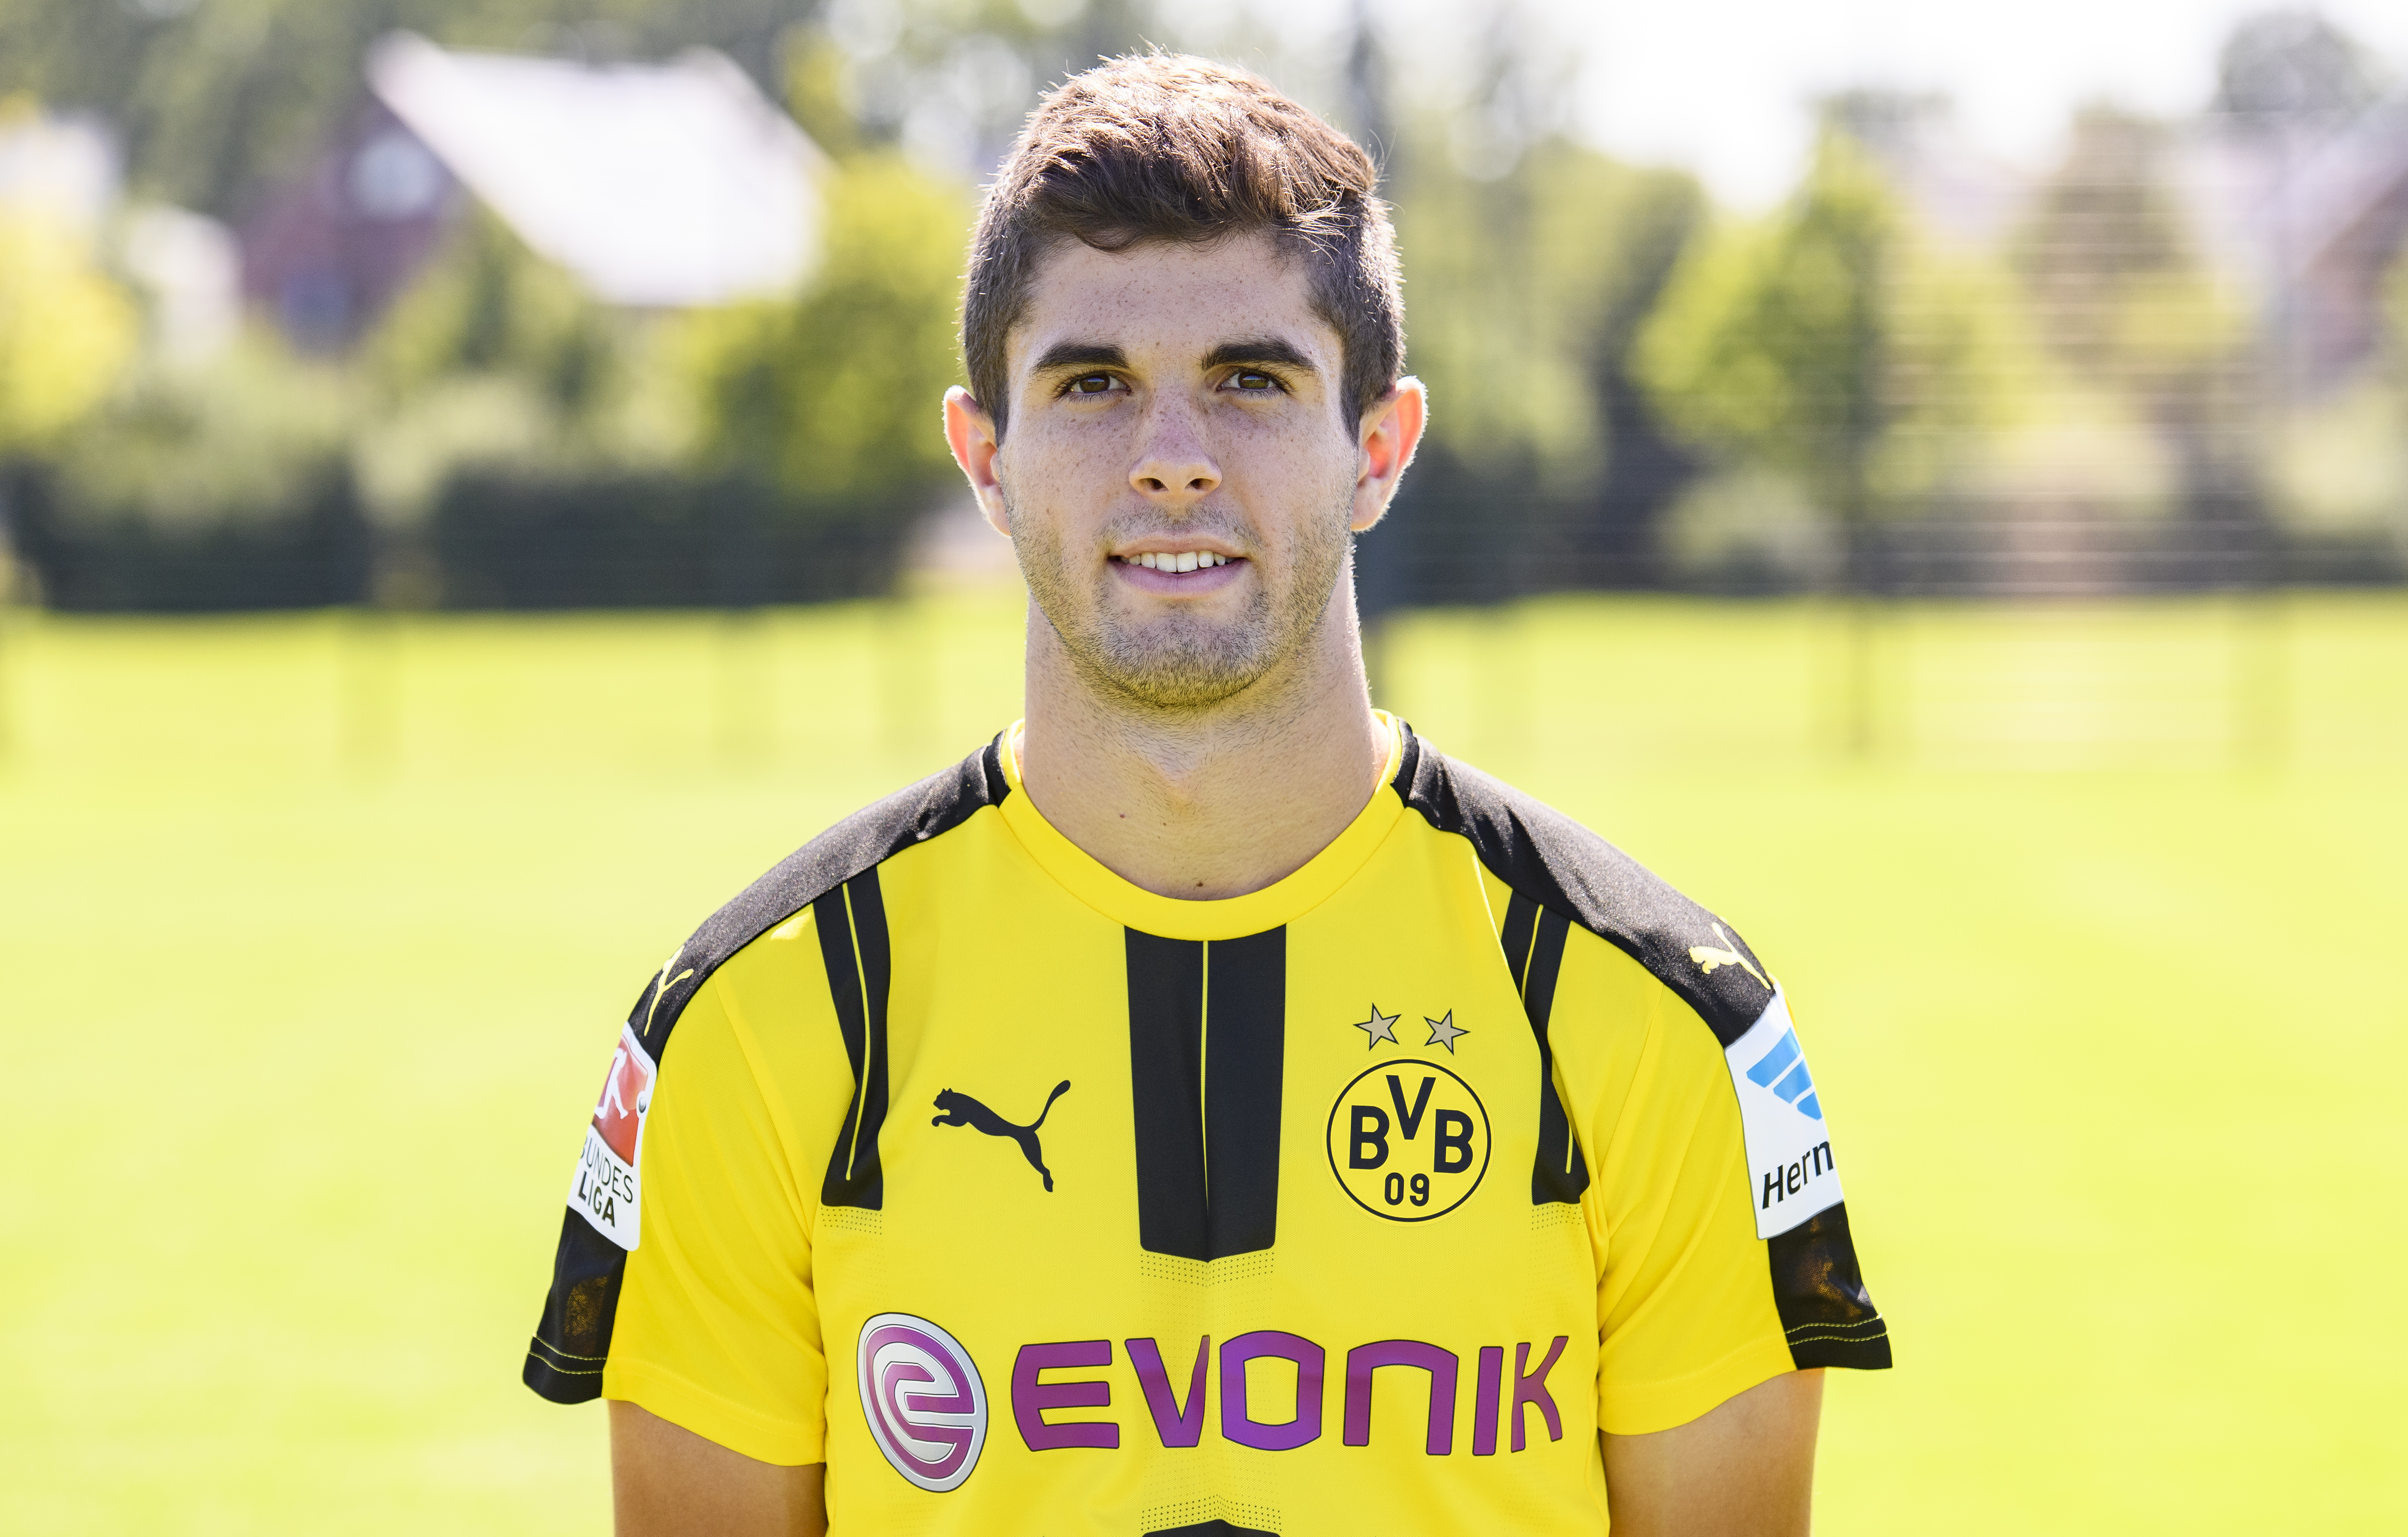 DORTMUND, GERMANY - AUGUST 17: Christian Pulisic  poses during the team presentation of Borussia Dortmund on August 17, 2016 in Dortmund, Germany. (Photo by Alexander Scheuber/Bongarts/Getty Images)